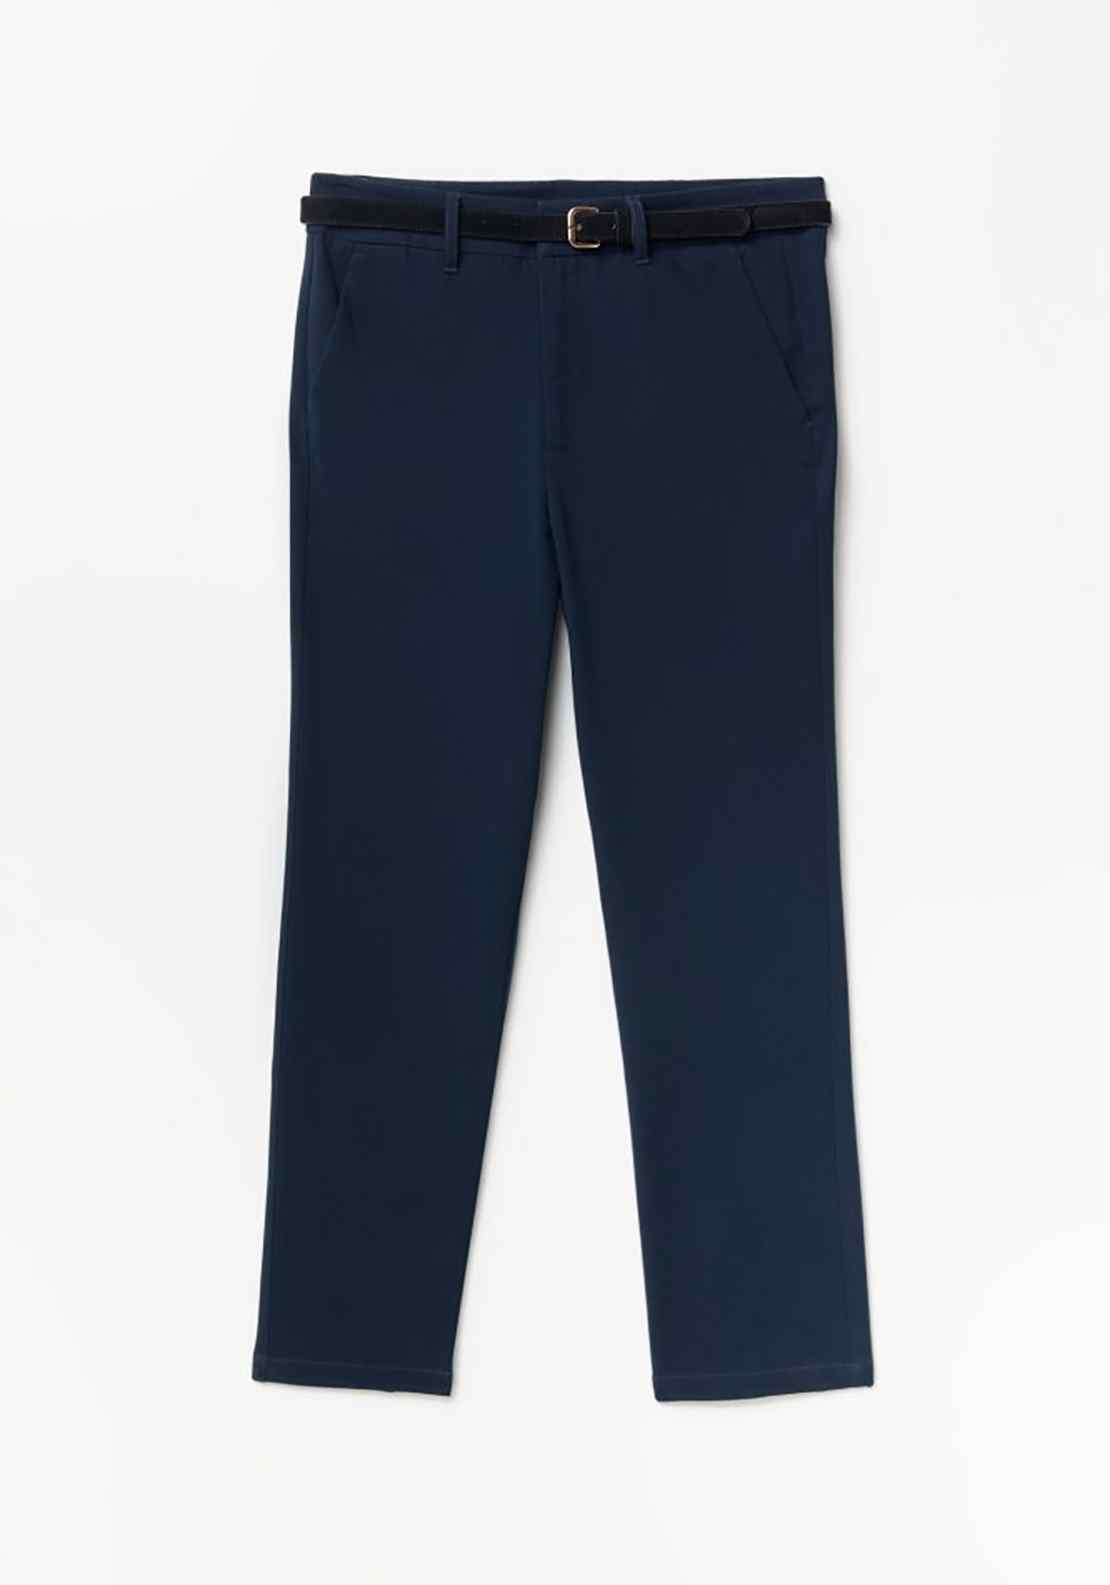 Sfera Belted Chino Trousers - Navy 6 Shaws Department Stores